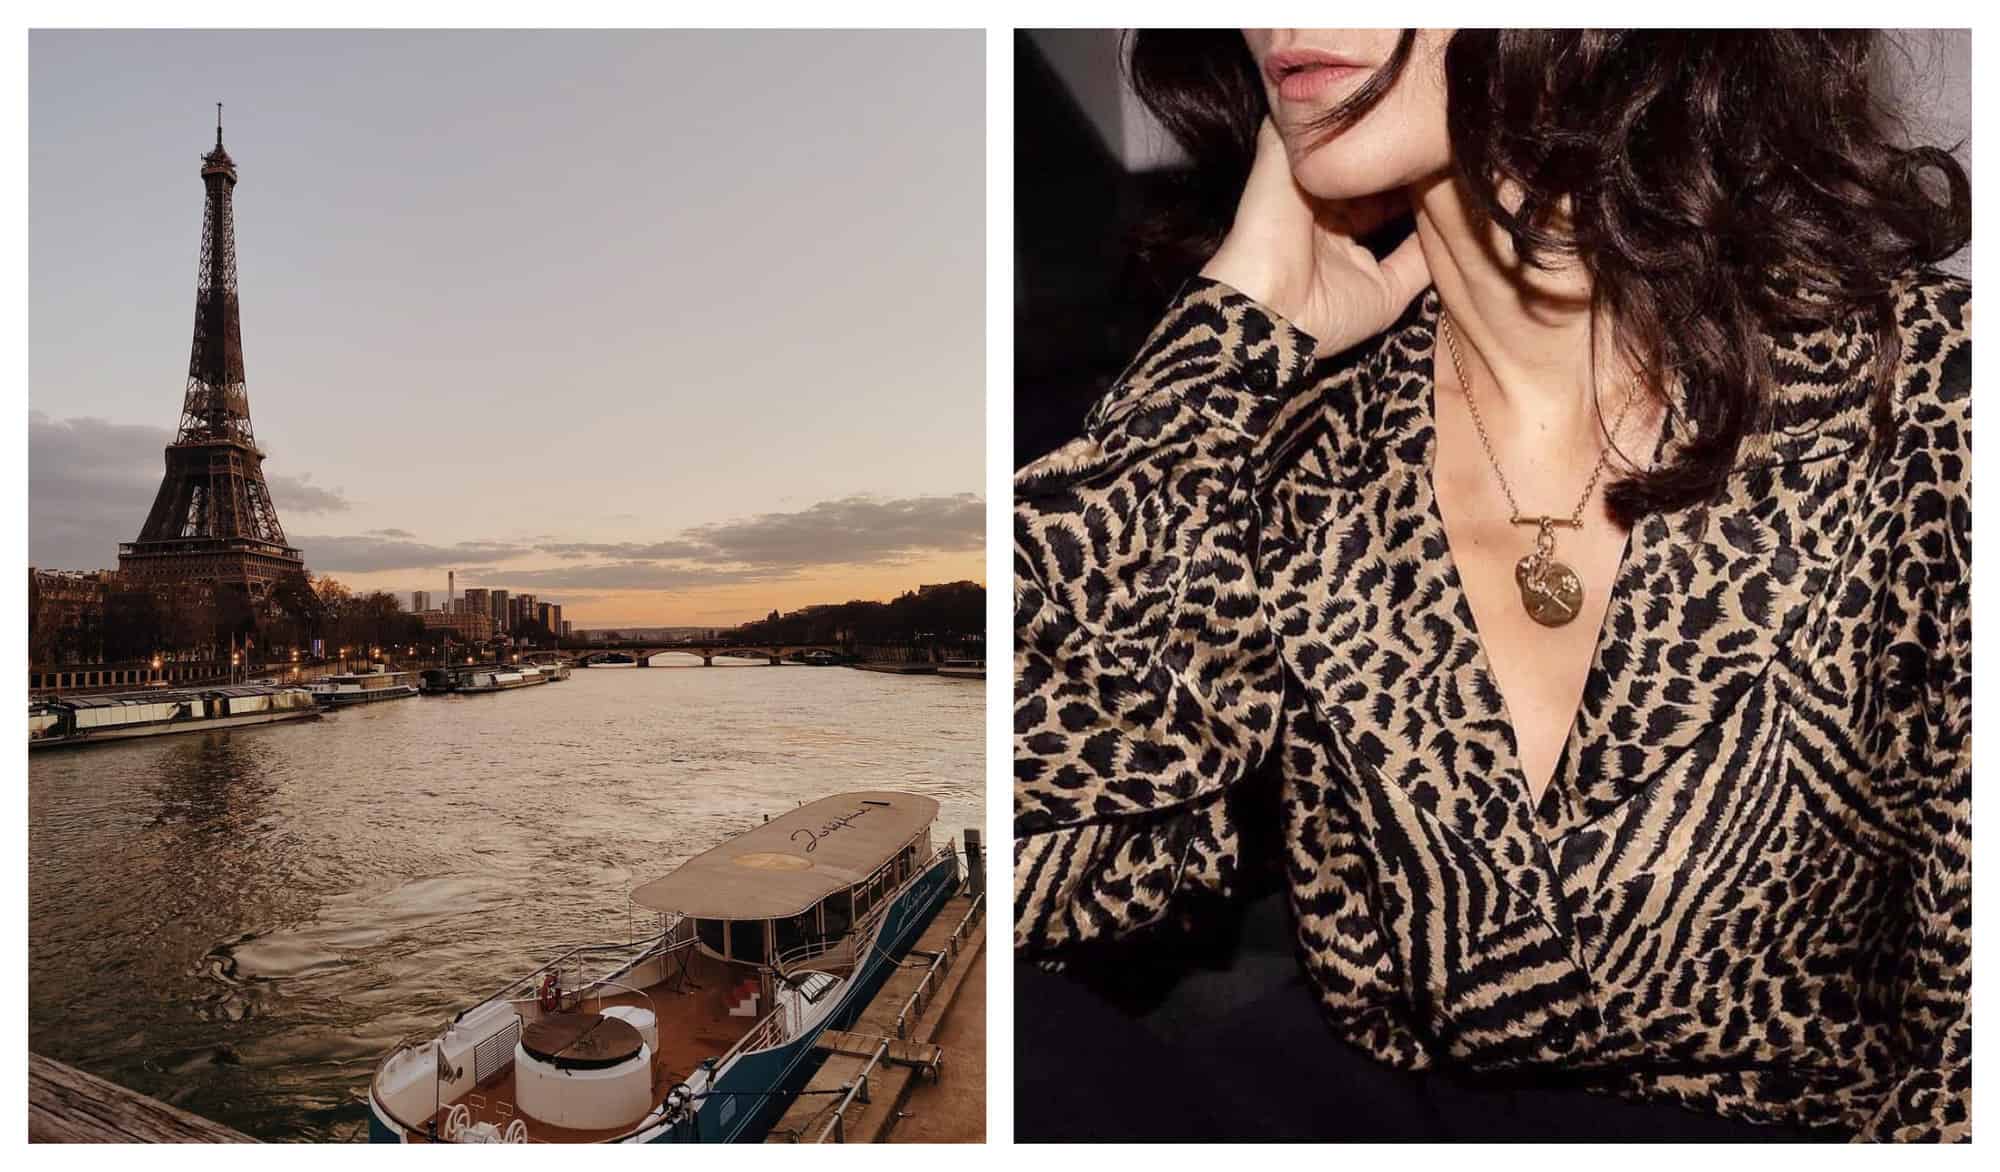 Left: A photo of the Eiffel tower, the seine, and a boat taken at sunset. Right: A picture fo a woman with a gold necklace and leopard print shirt.